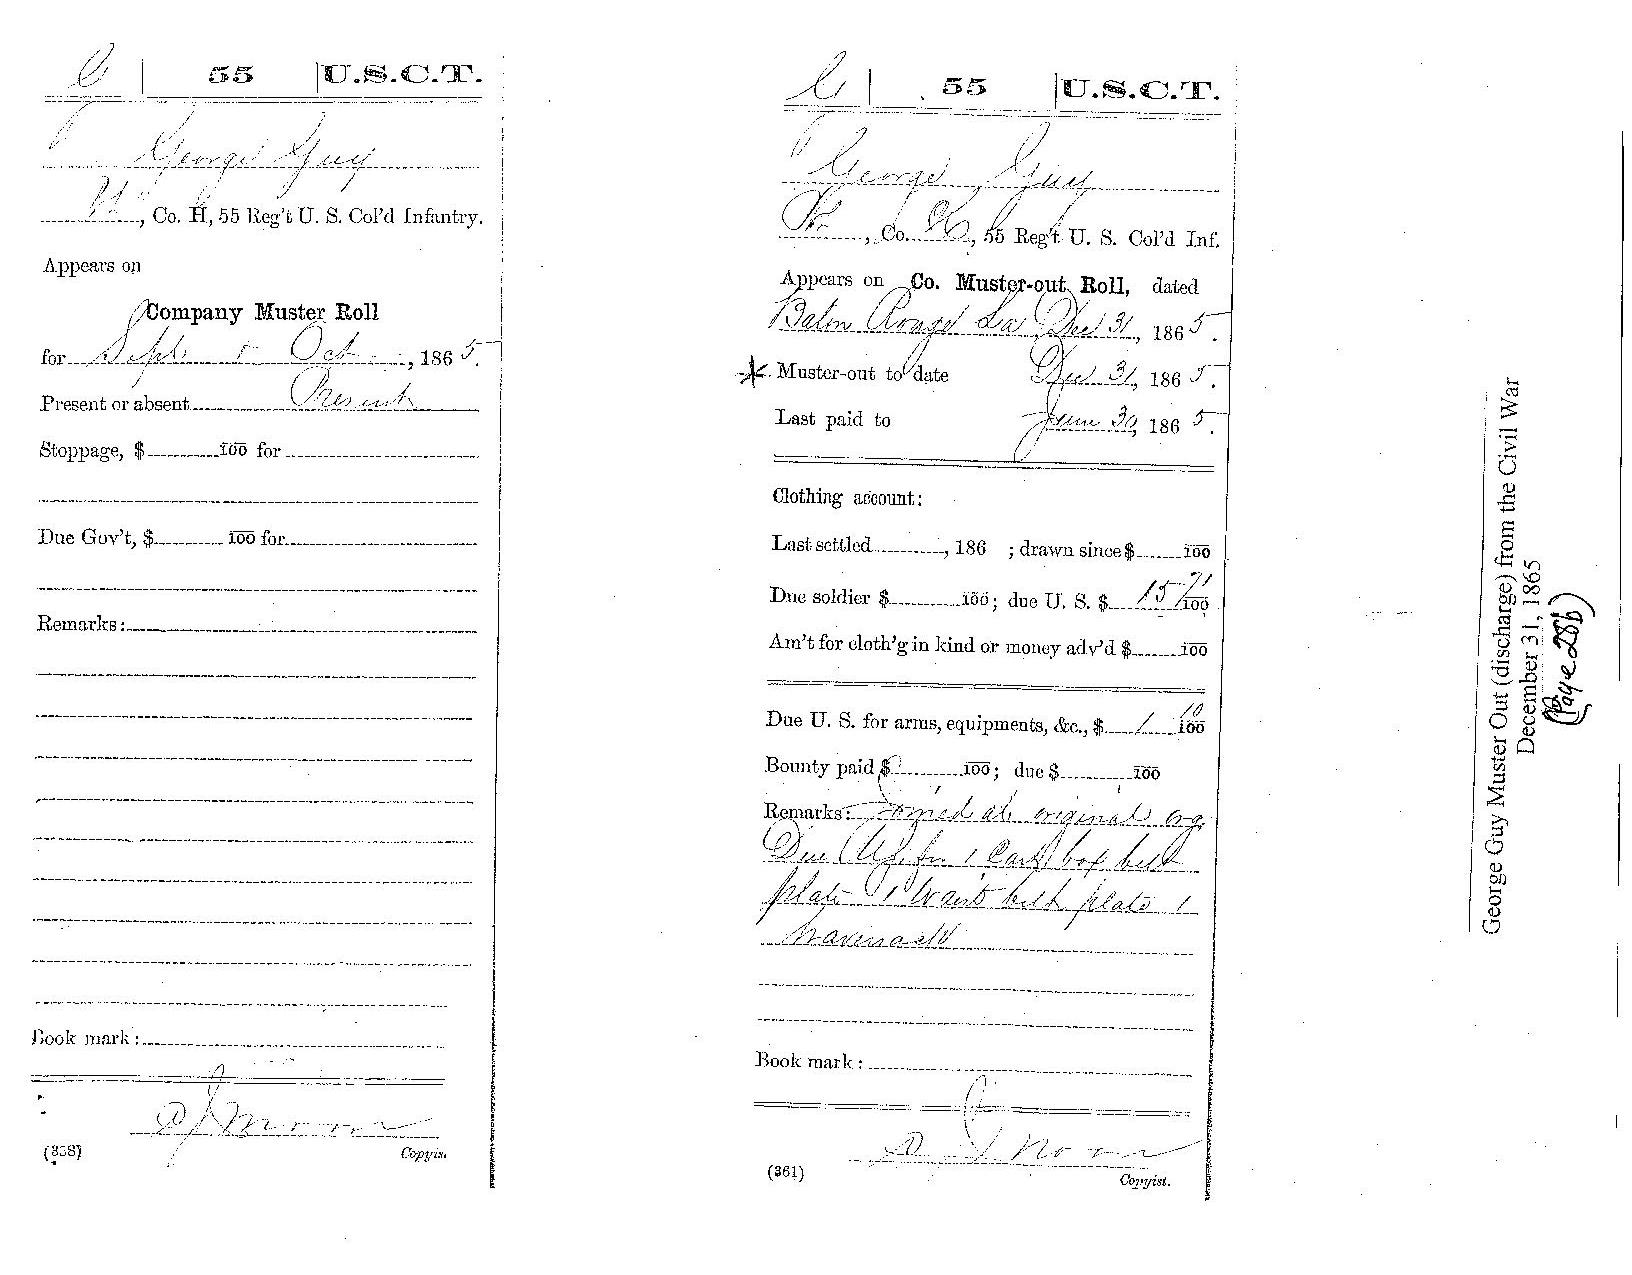 George Guy's Muster Out (discharge) from the Civil War December 31, 1865